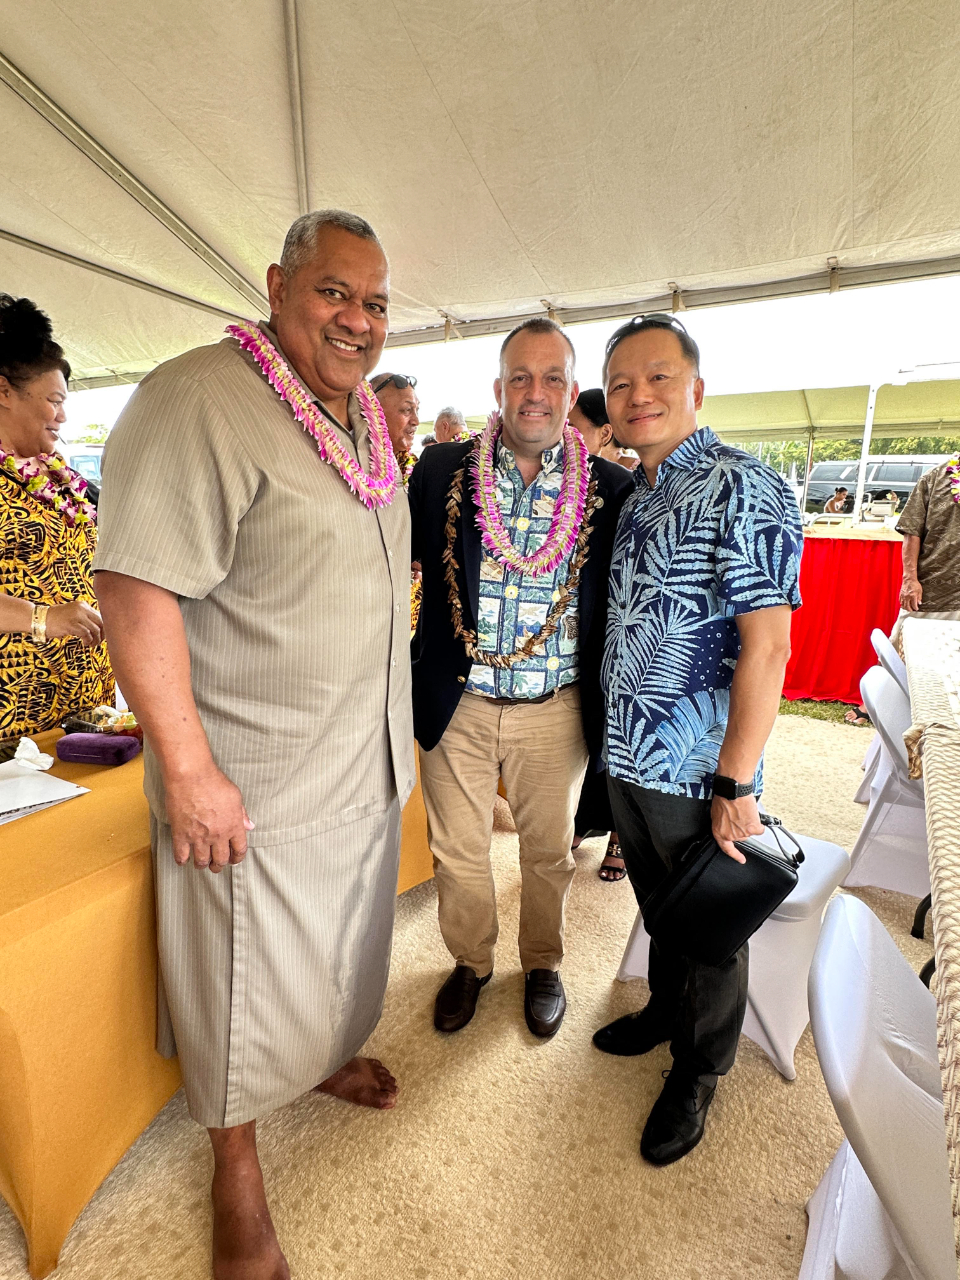 Director General Richard Lin is invited to the opening ceremony of Samoa Heritage Week and has a group photo with the Governor Lemanu Sialega Peleti Mauga of American Samoa and Governor Josh Green of Hawaii State on July 29, 2023.